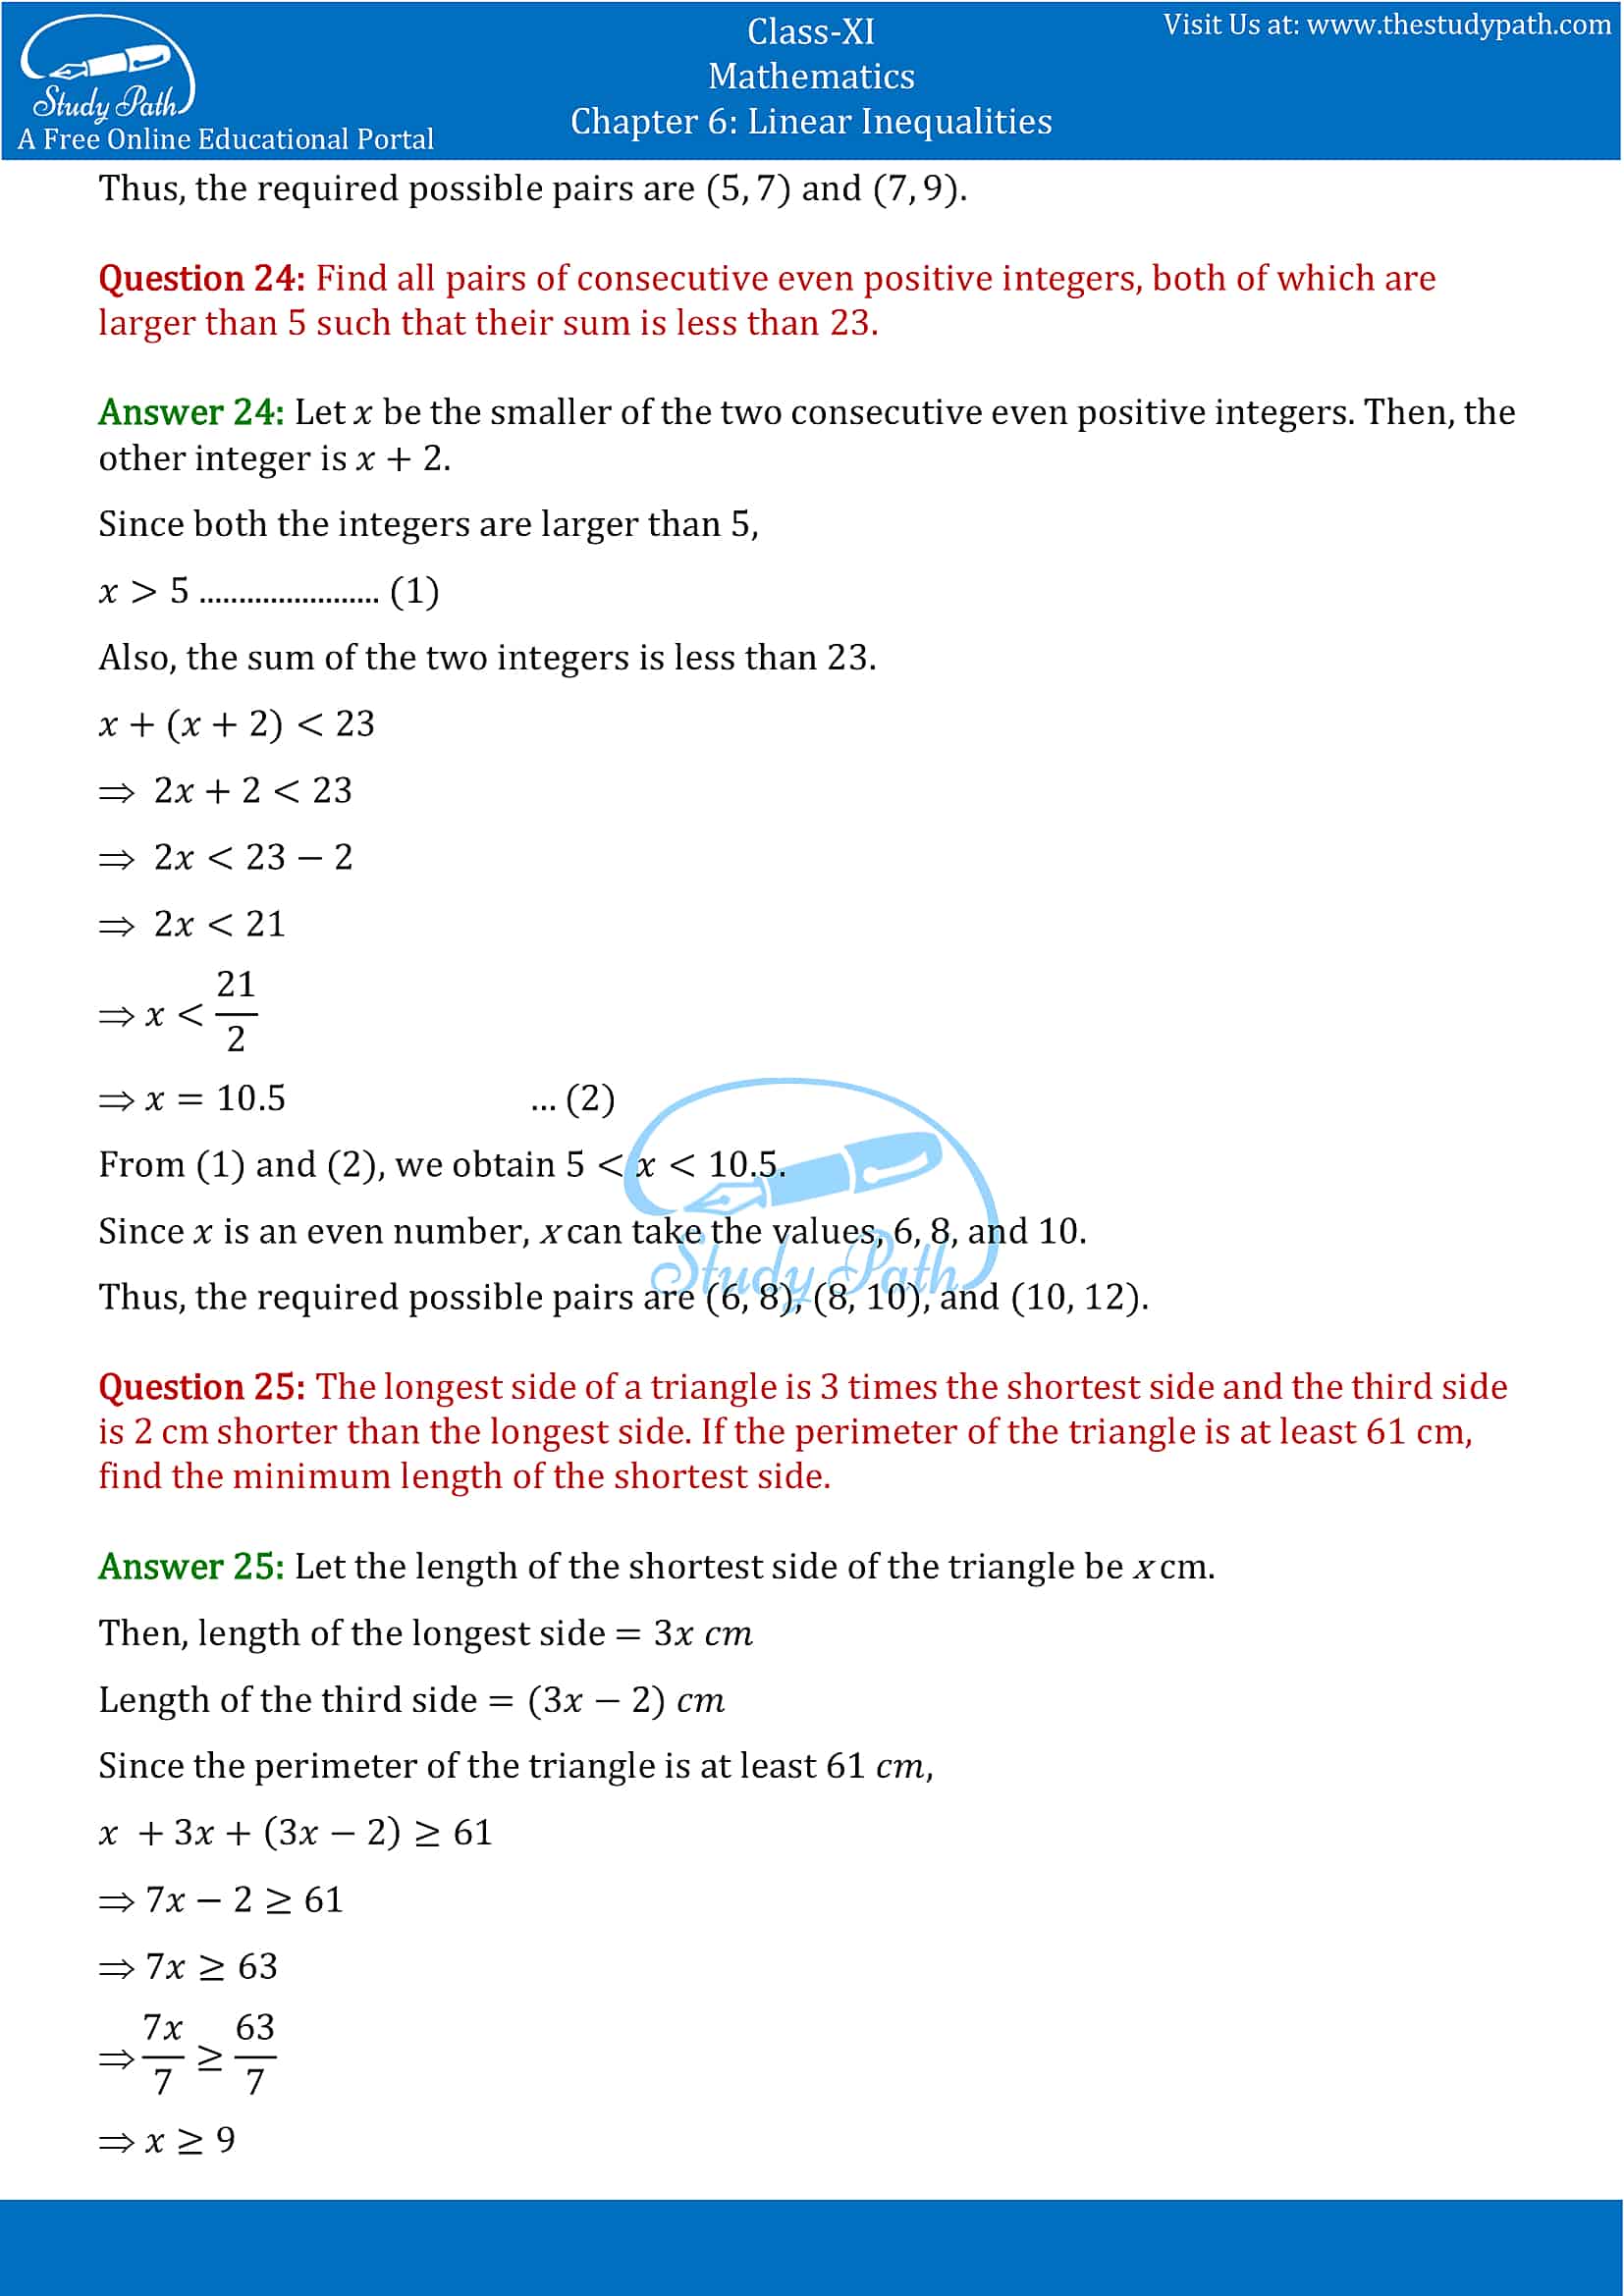 NCERT Solutions for Class 11 Maths chapter 6 Linear Inequalities Exercise 6.1 Part-12